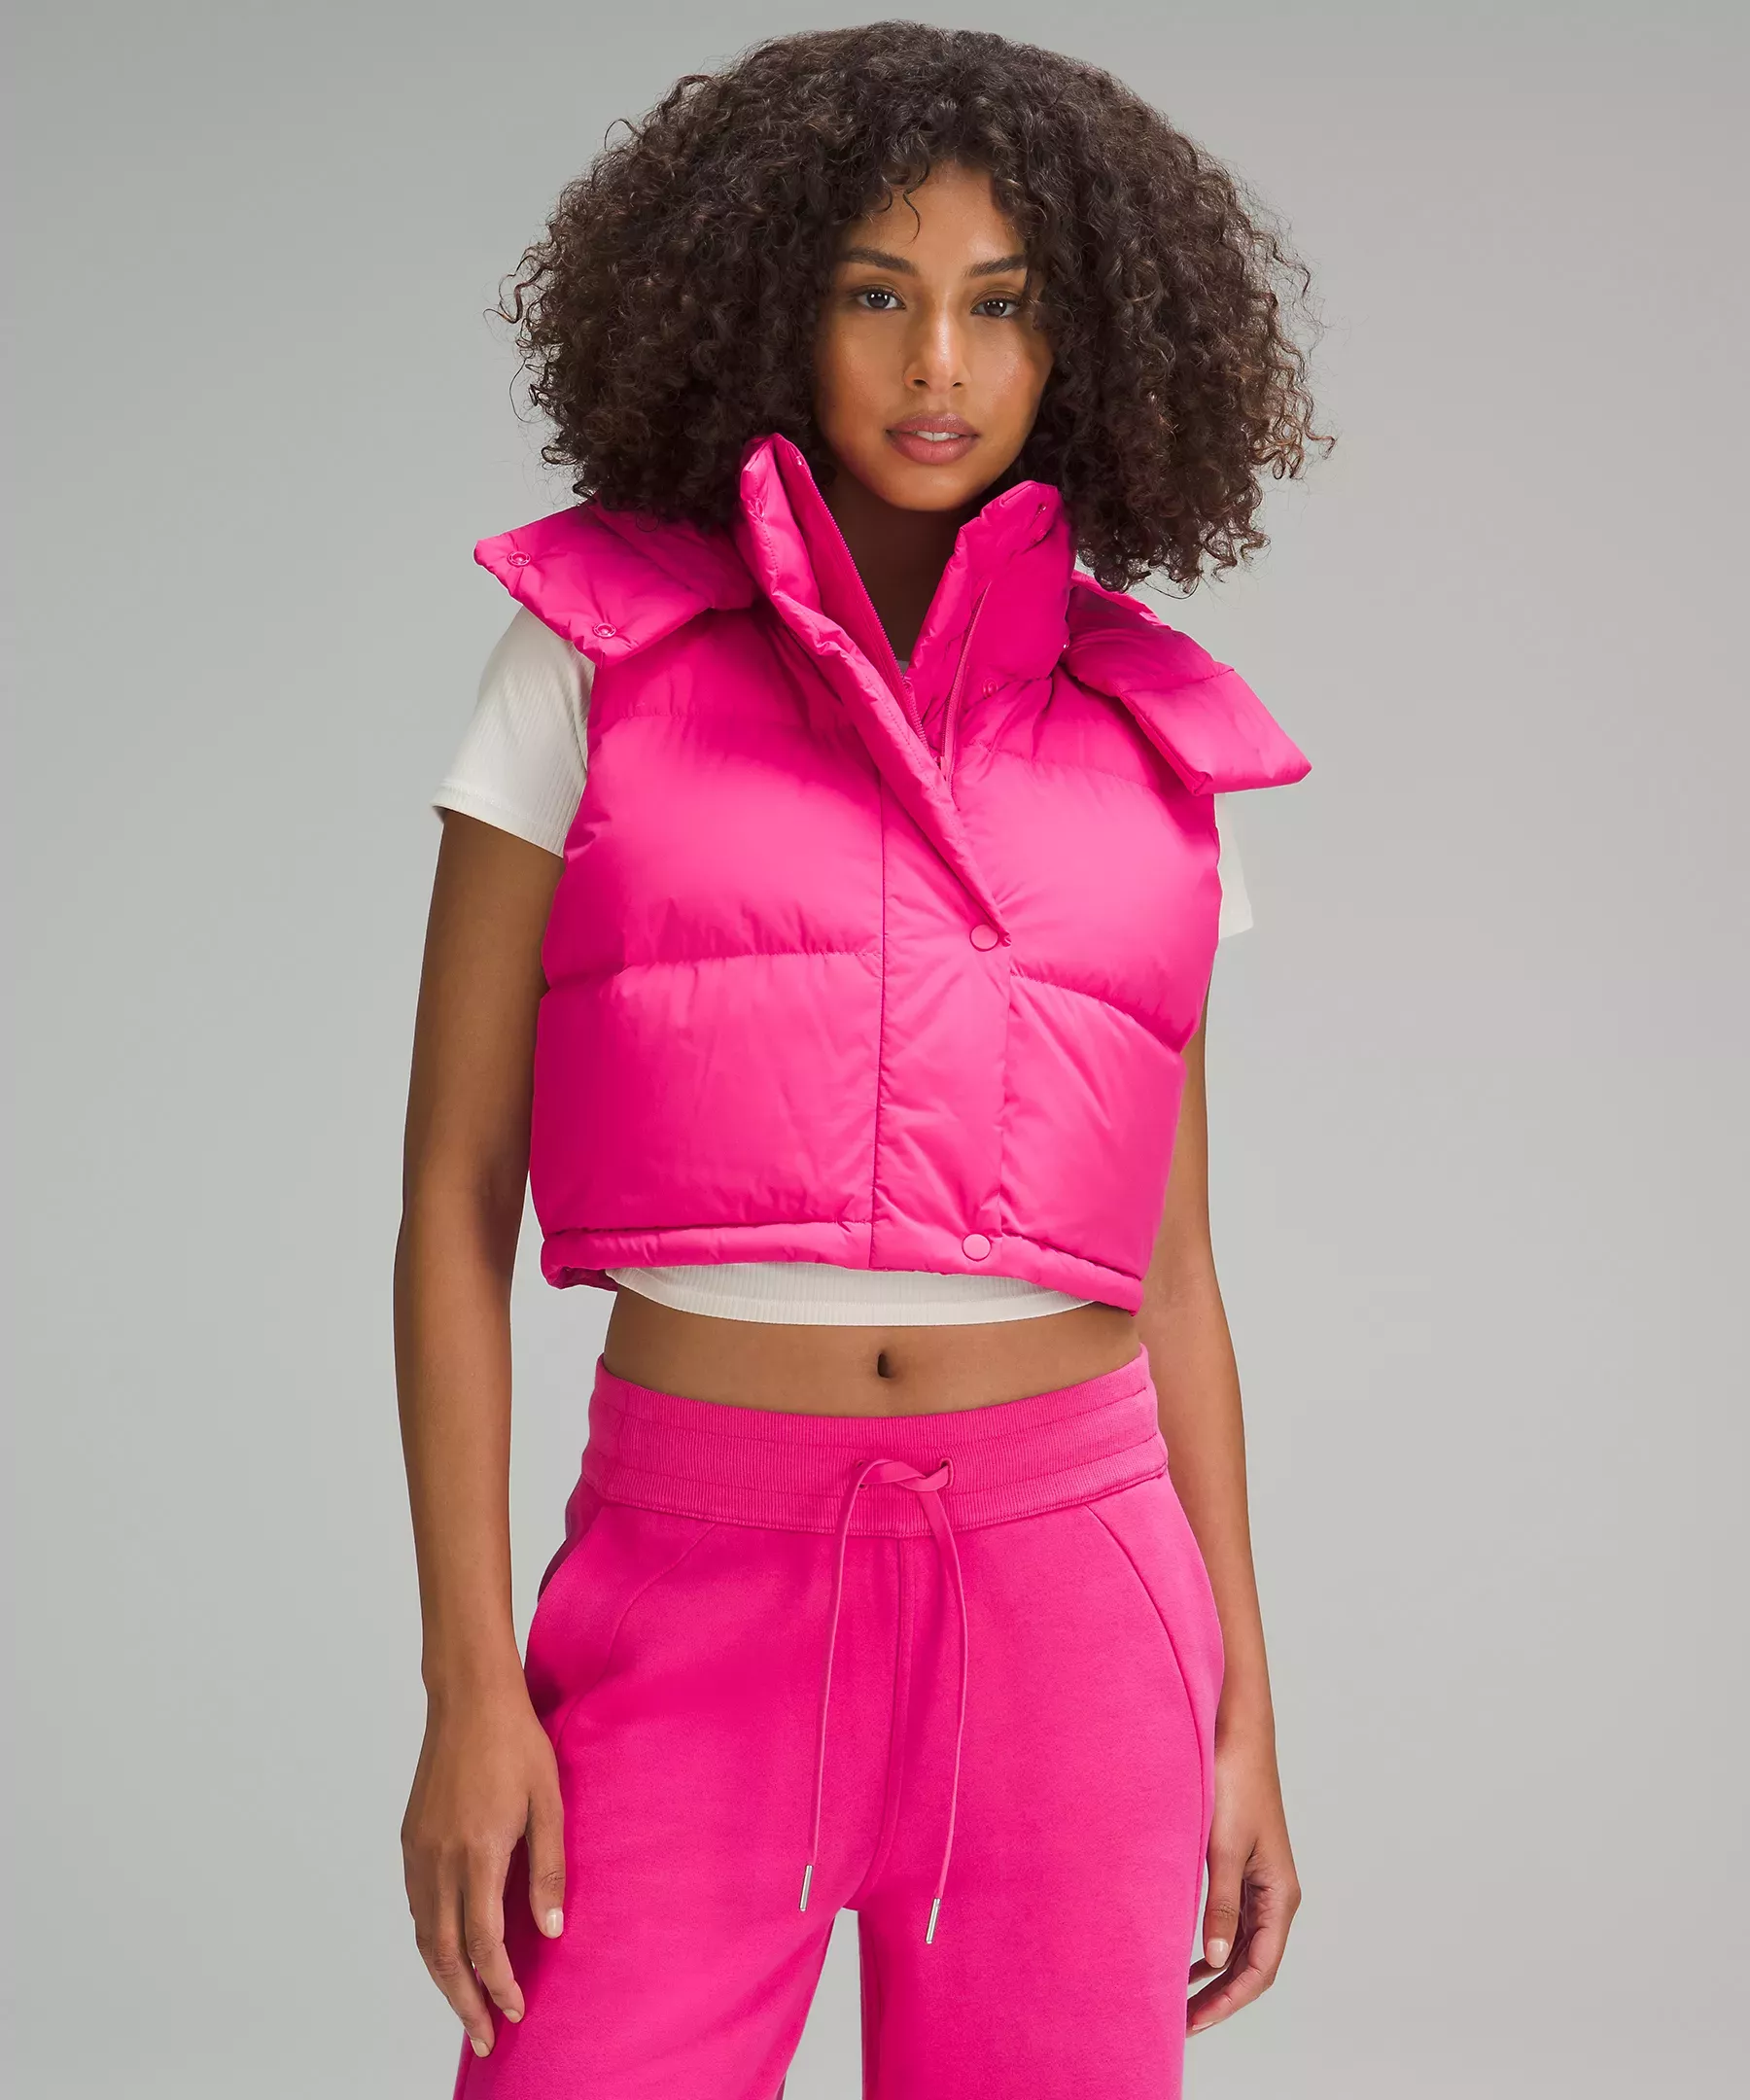 Track Wunder Puff Cropped Vest - Meadowsweet Pink - 4 at Lululemon